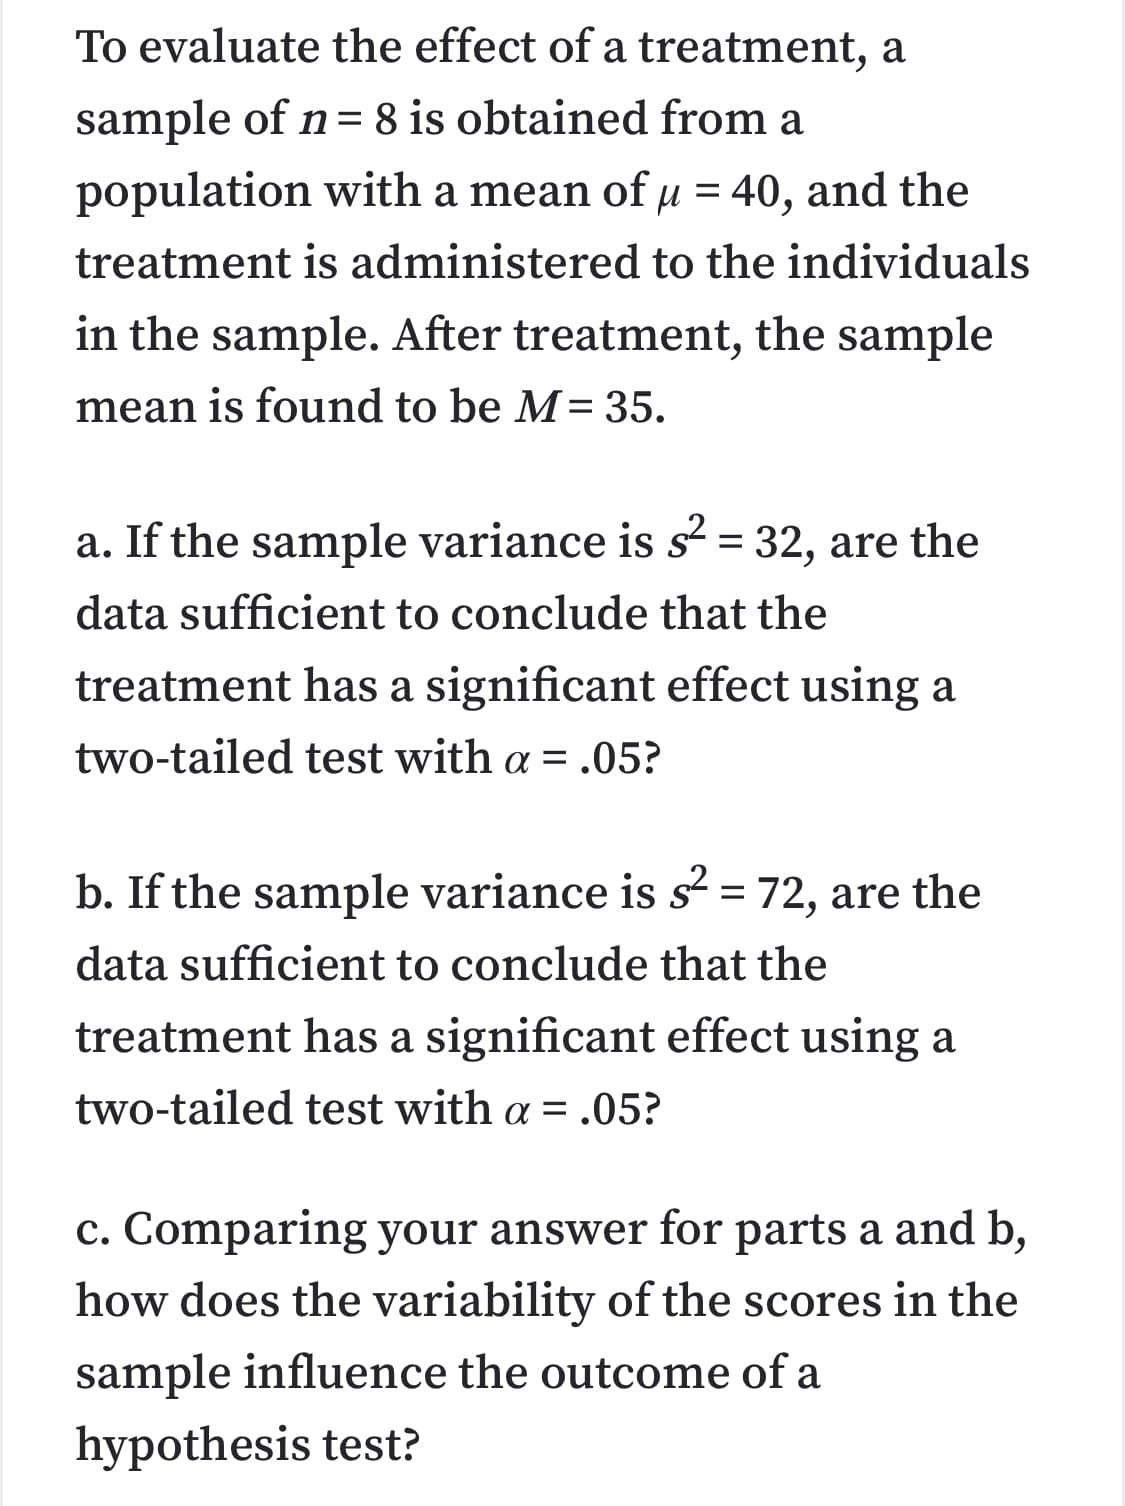 To evaluate the effect of a treatment, a
sample of n= 8 is obtained from a
population with a mean of µ = 40, and the
%|
treatment is administered to the individuals
in the sample. After treatment, the sample
mean is found to be M= 35.
a. If the sample variance is s = 32, are the
%|
data sufficient to conclude that the
treatment has a significant effect using a
two-tailed test with a = .05?
b. If the sample variance is s² = 72, are the
data sufficient to conclude that the
treatment has a significant effect using a
two-tailed test with a = .05?
c. Comparing your answer for parts a and b,
how does the variability of the scores in the
sample influence the outcome of a
hypothesis test?
